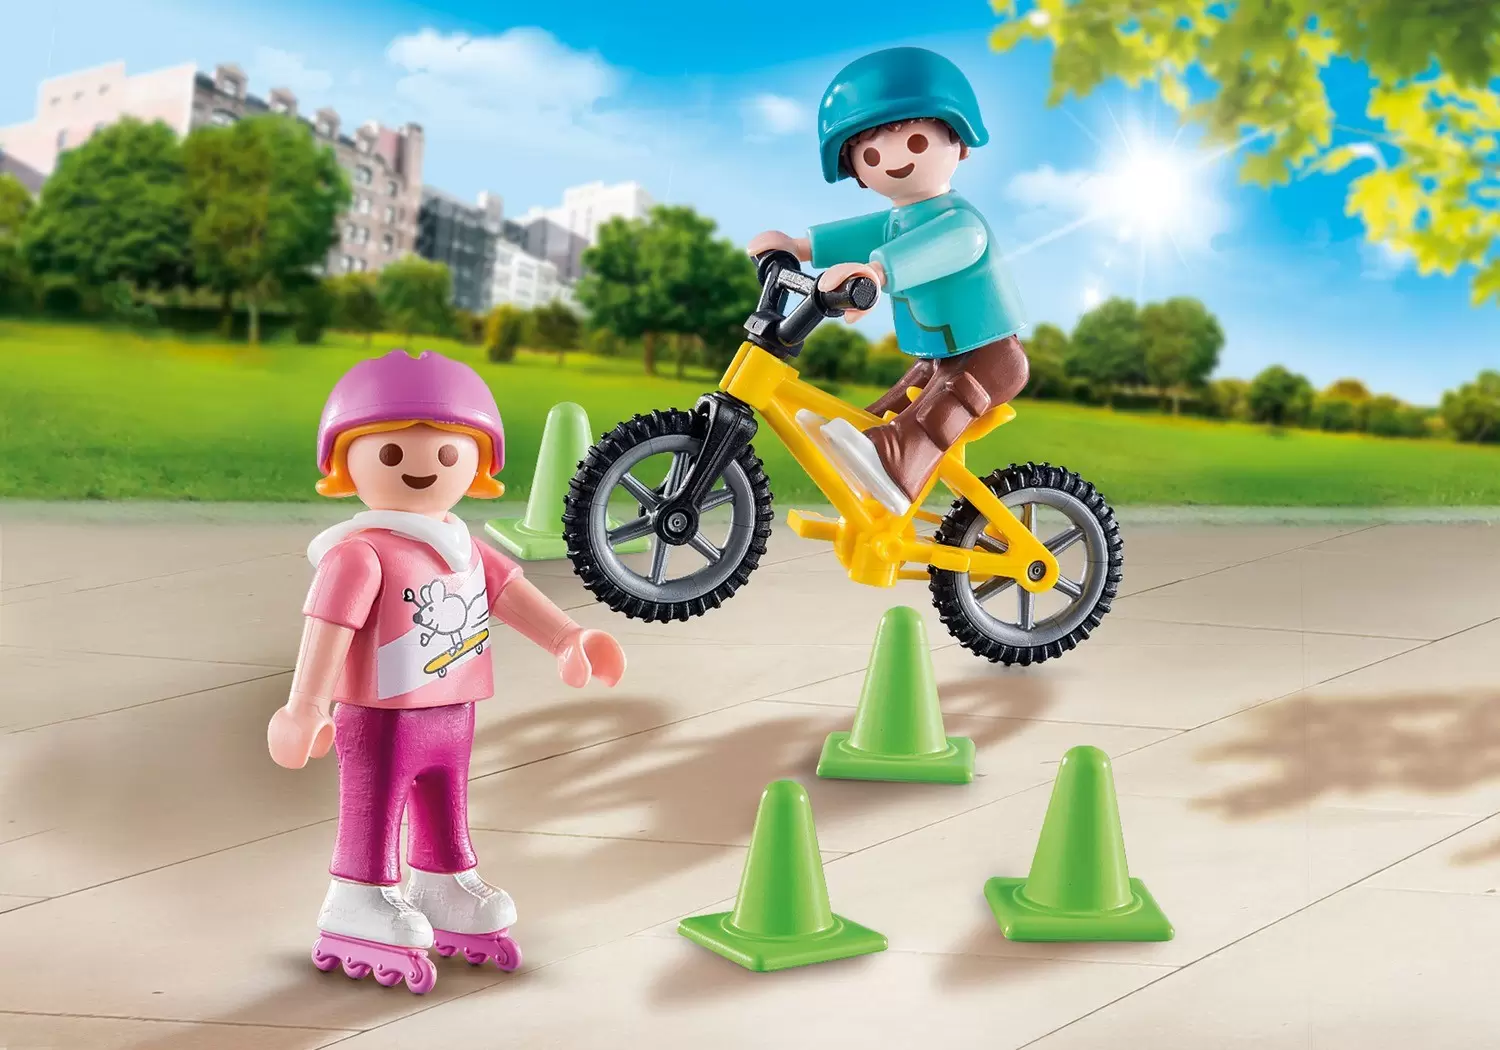 Playmobil SpecialPlus - Kids with rollers and BMX